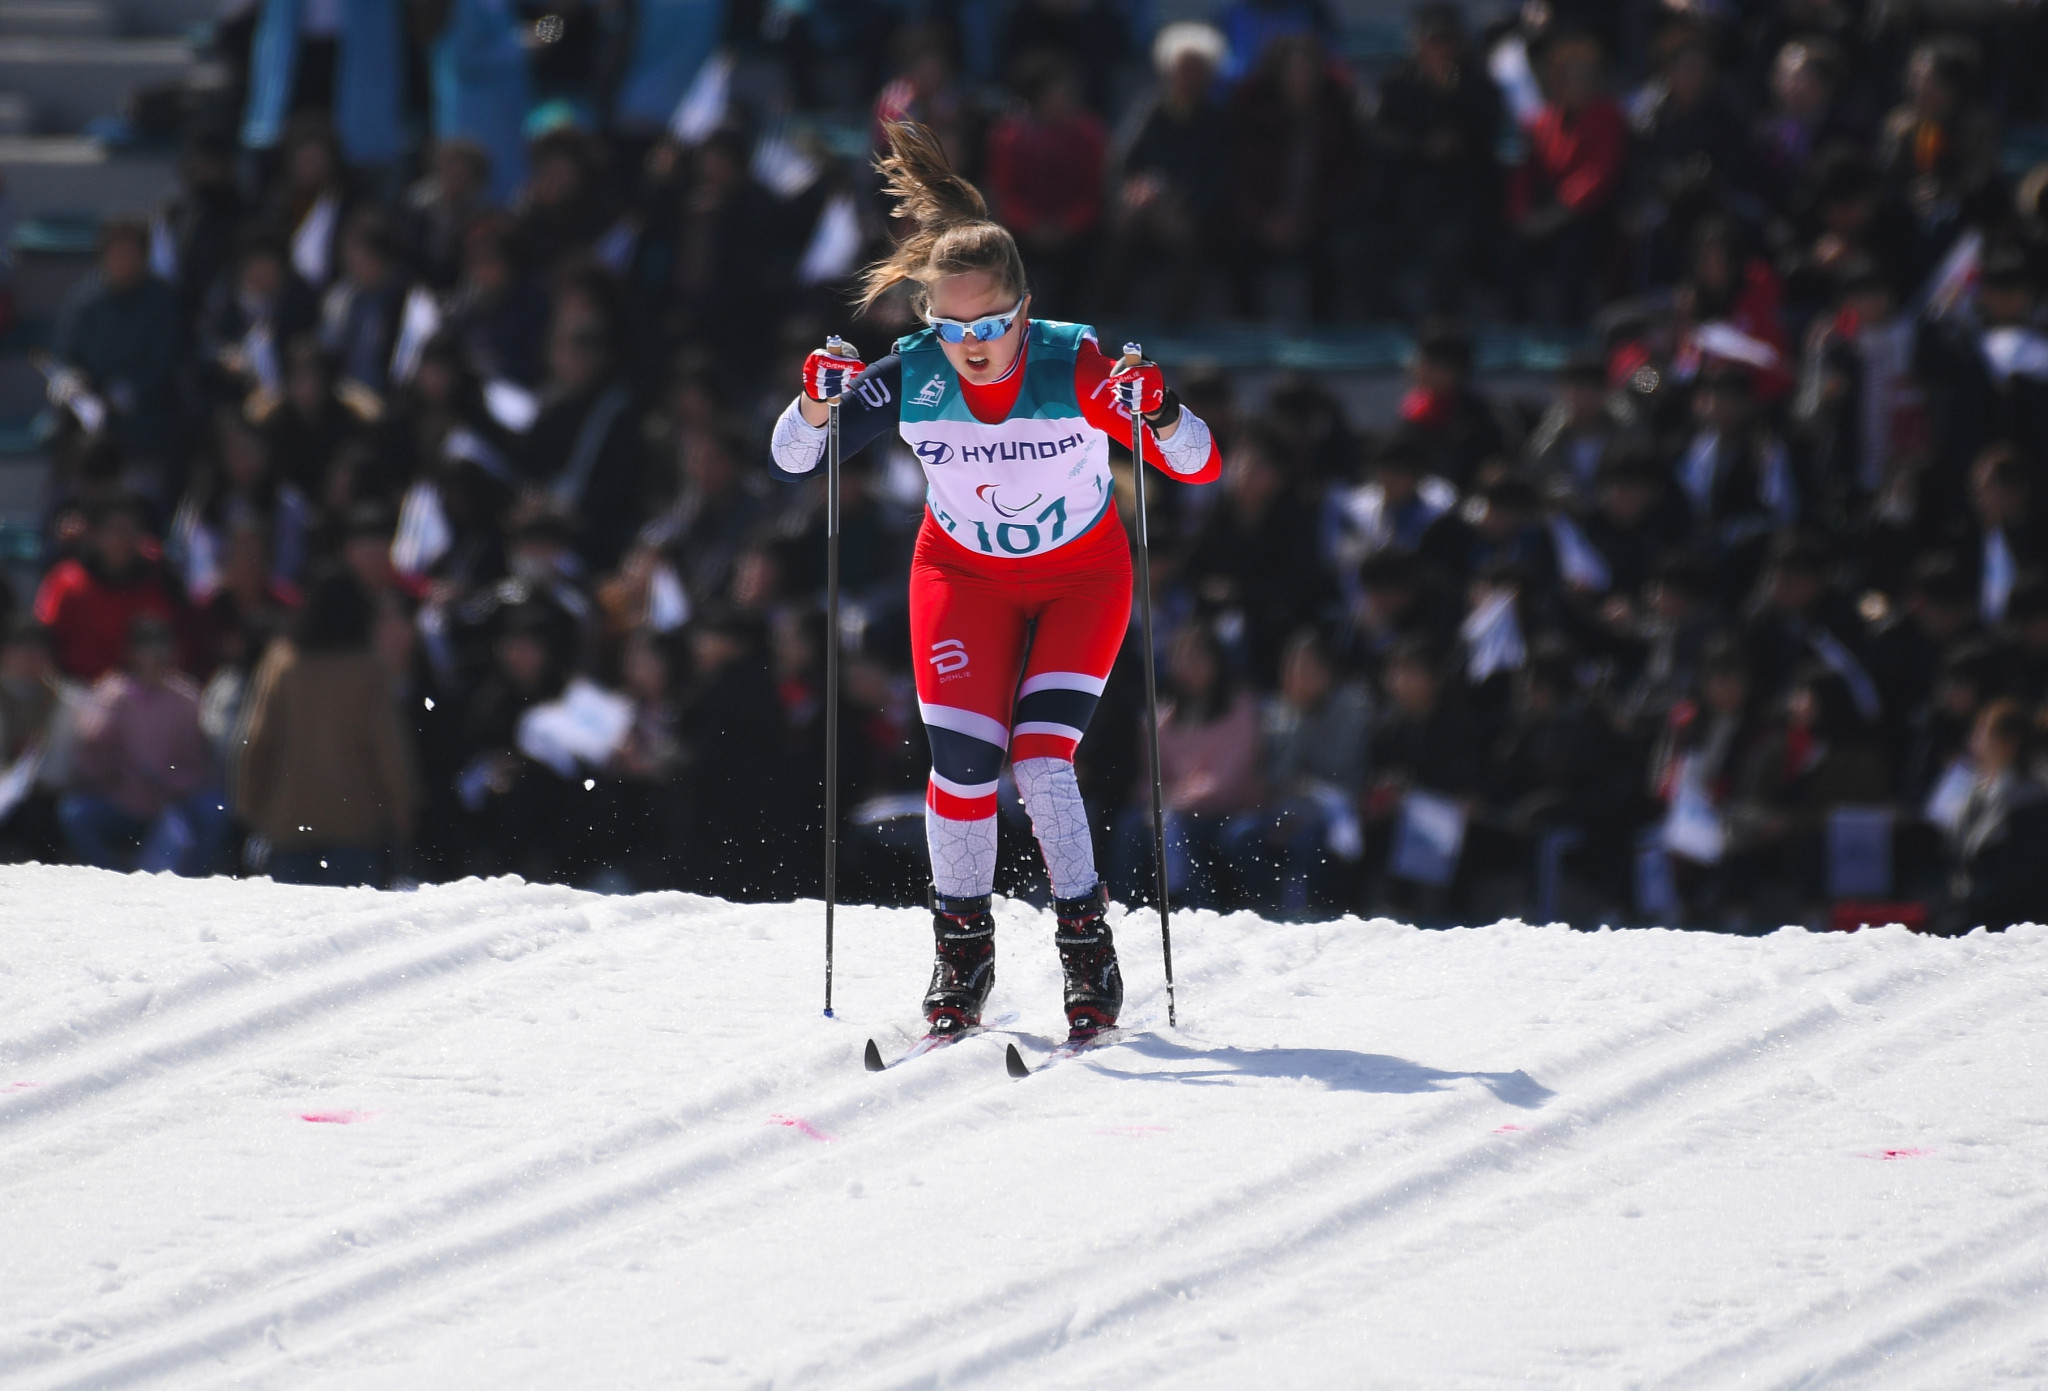 Norway's Nilsen shines with three victories at home Para Nordic Skiing World Cup